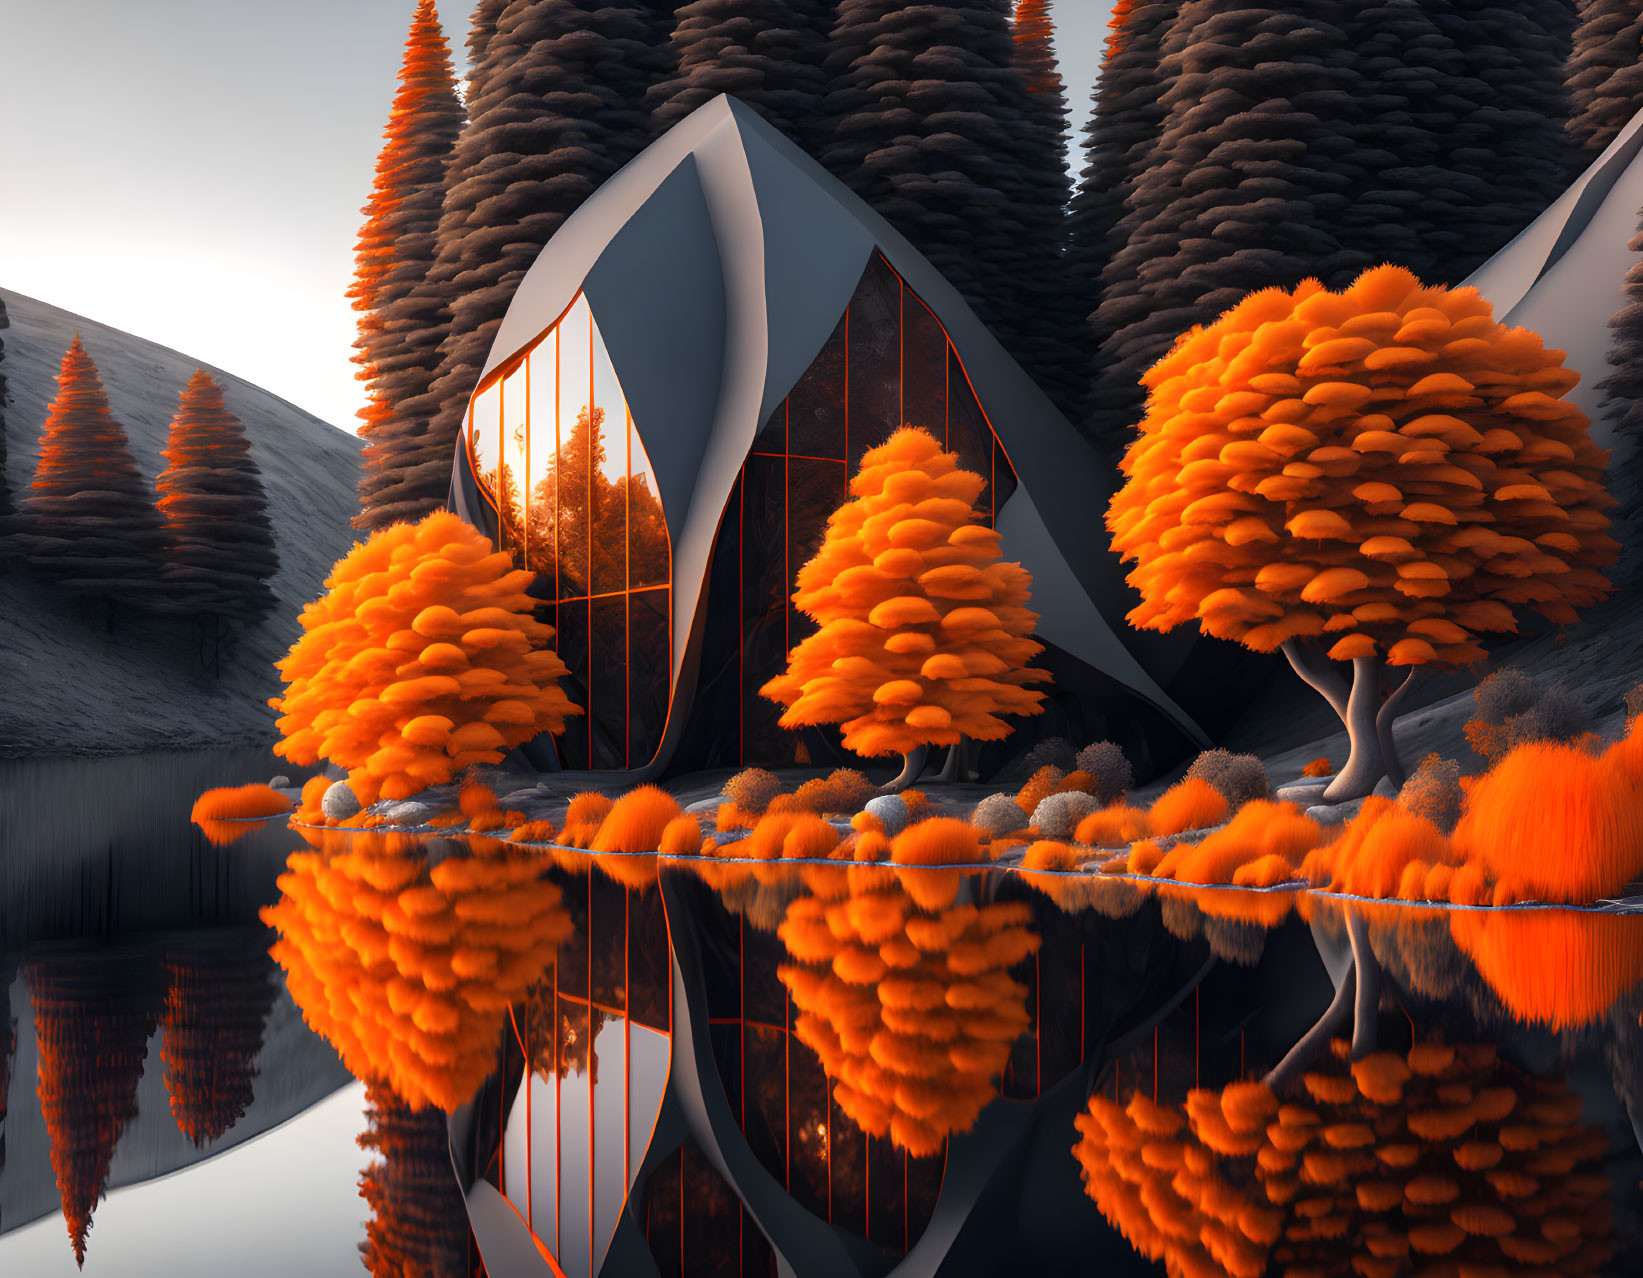 Modern building surrounded by autumn trees, lake, and mountains at sunrise or sunset